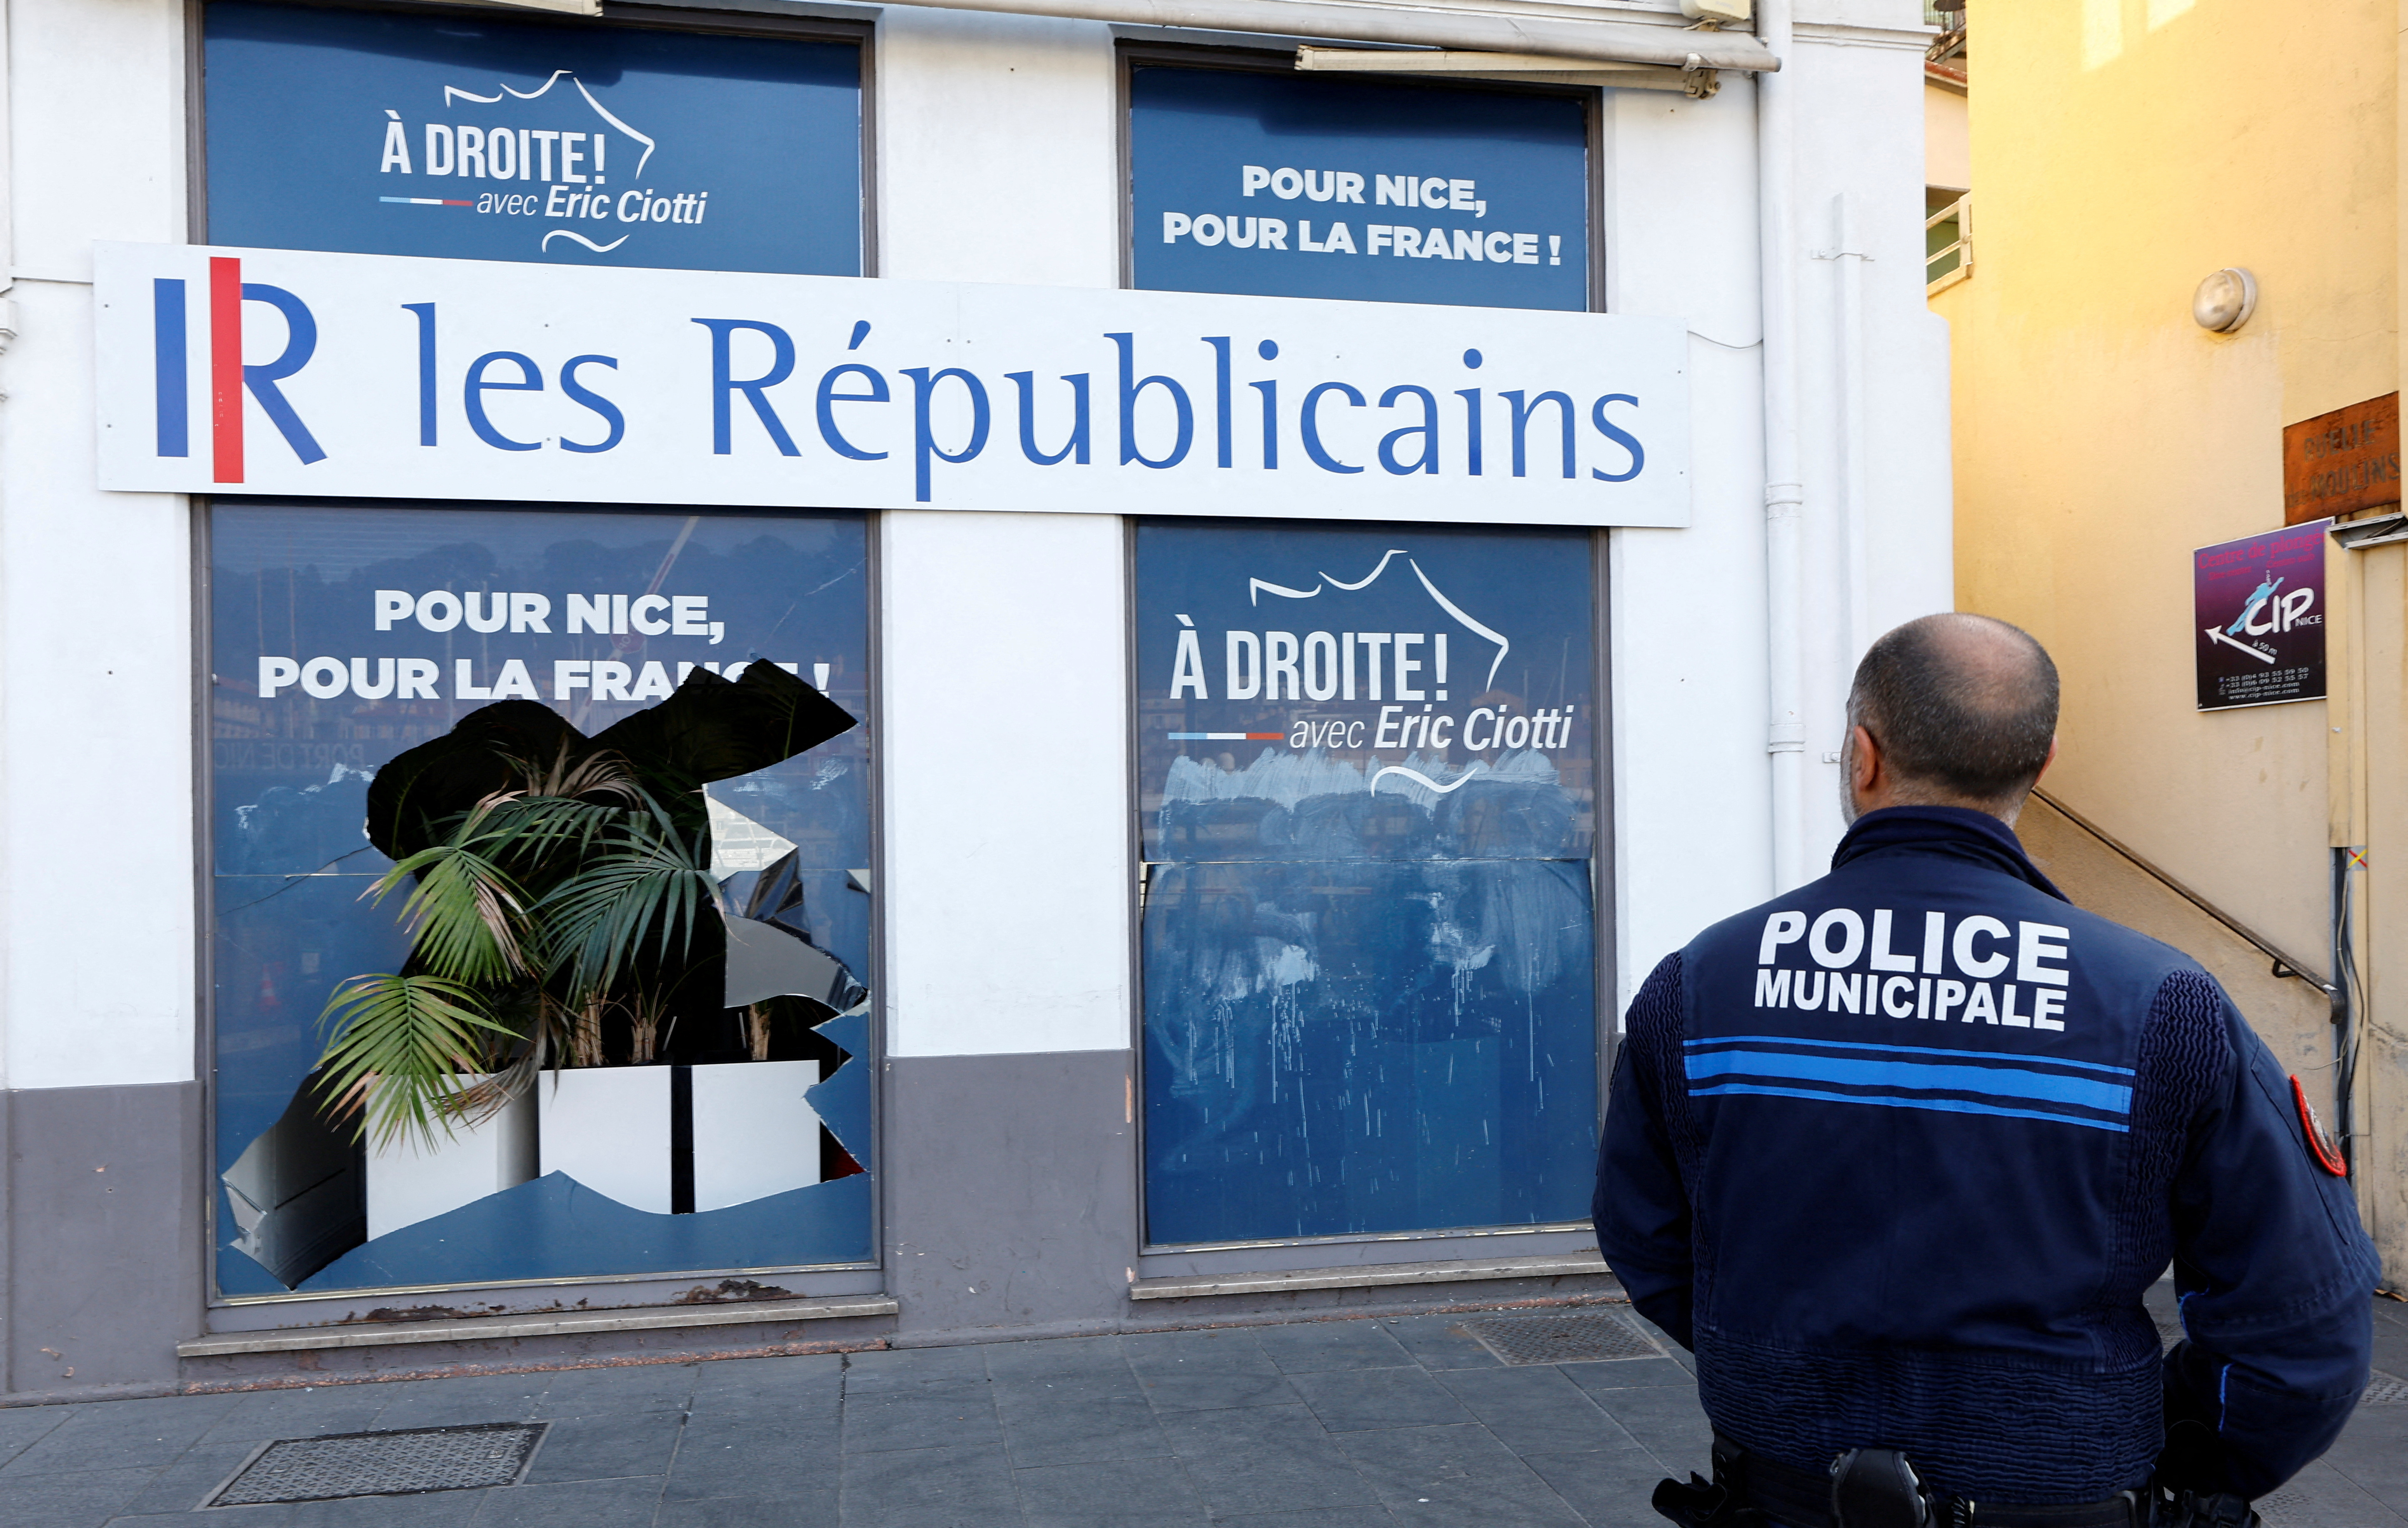 Leader of Les Republicains Eric Ciotti's office vandalized during night in Nice